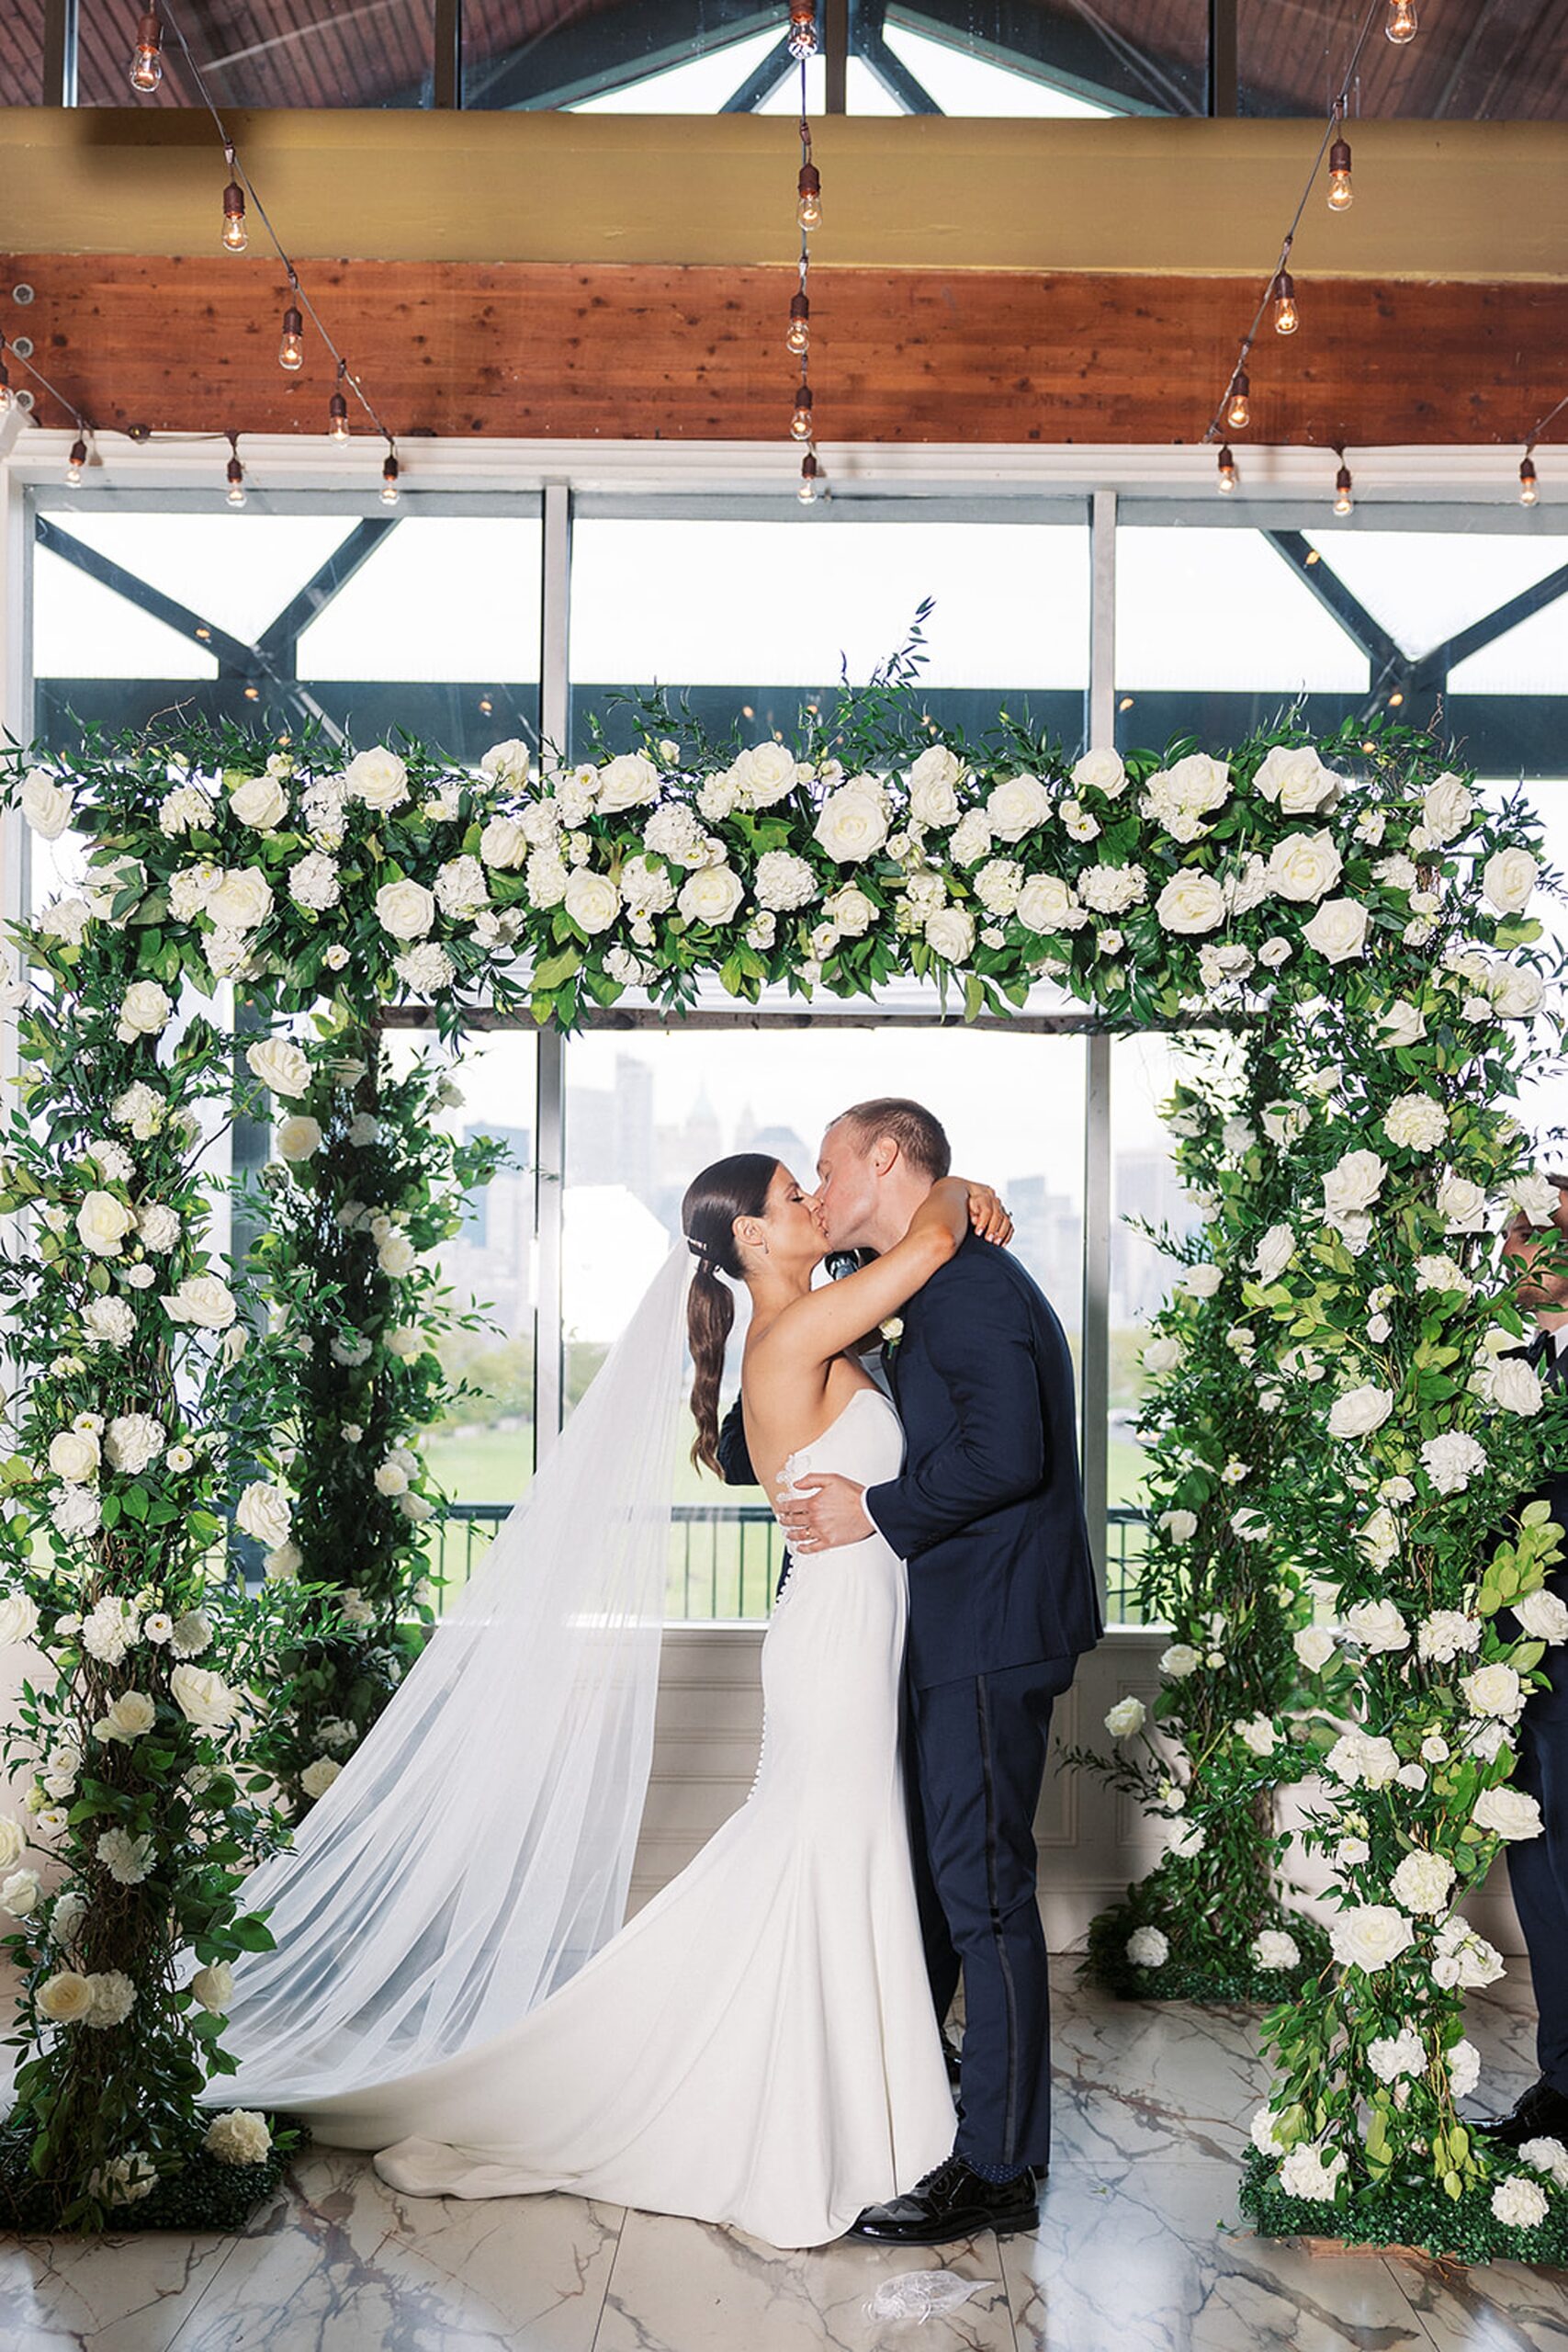 Newlyweds kiss at the end of their wedding ceremony under a white rose flower arch